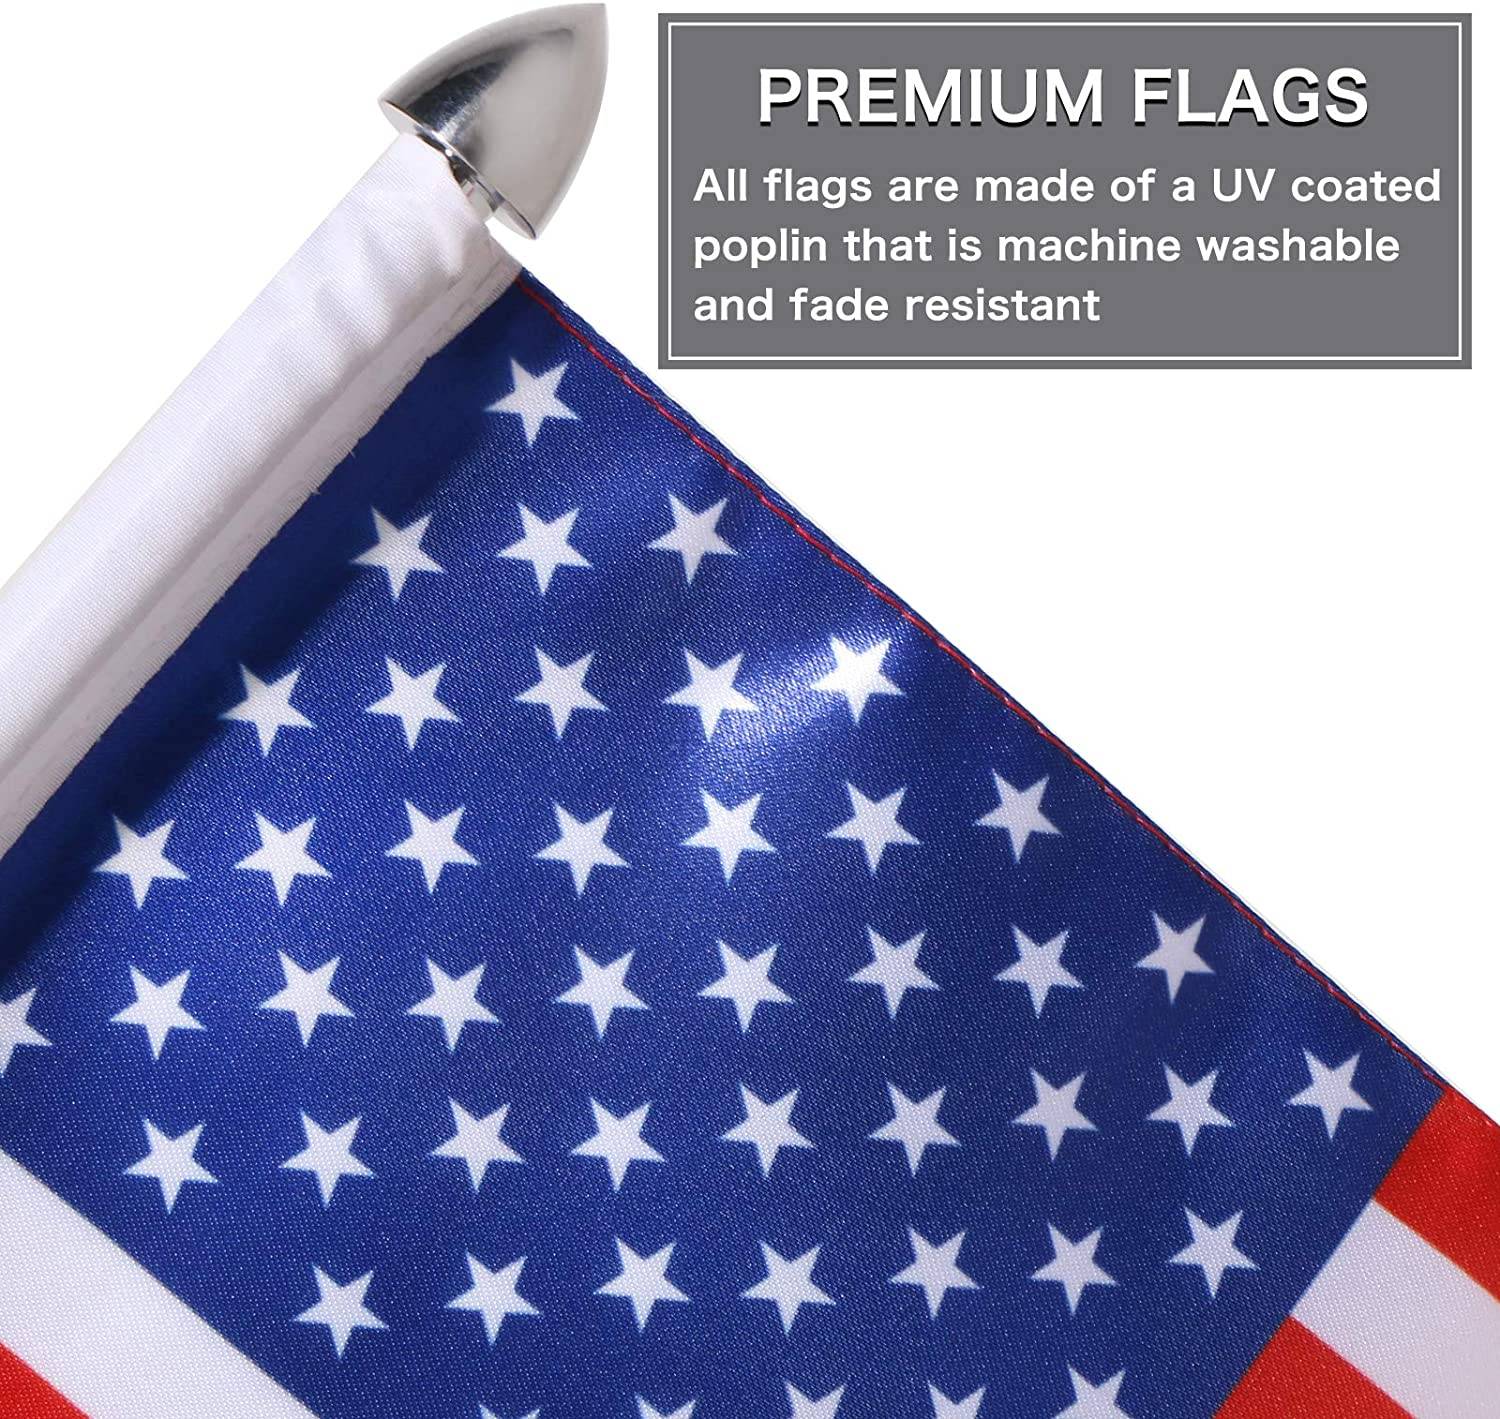 2 Pcs Motorcycle Flagpole Mount Foldable 90° (2 Color Flags)